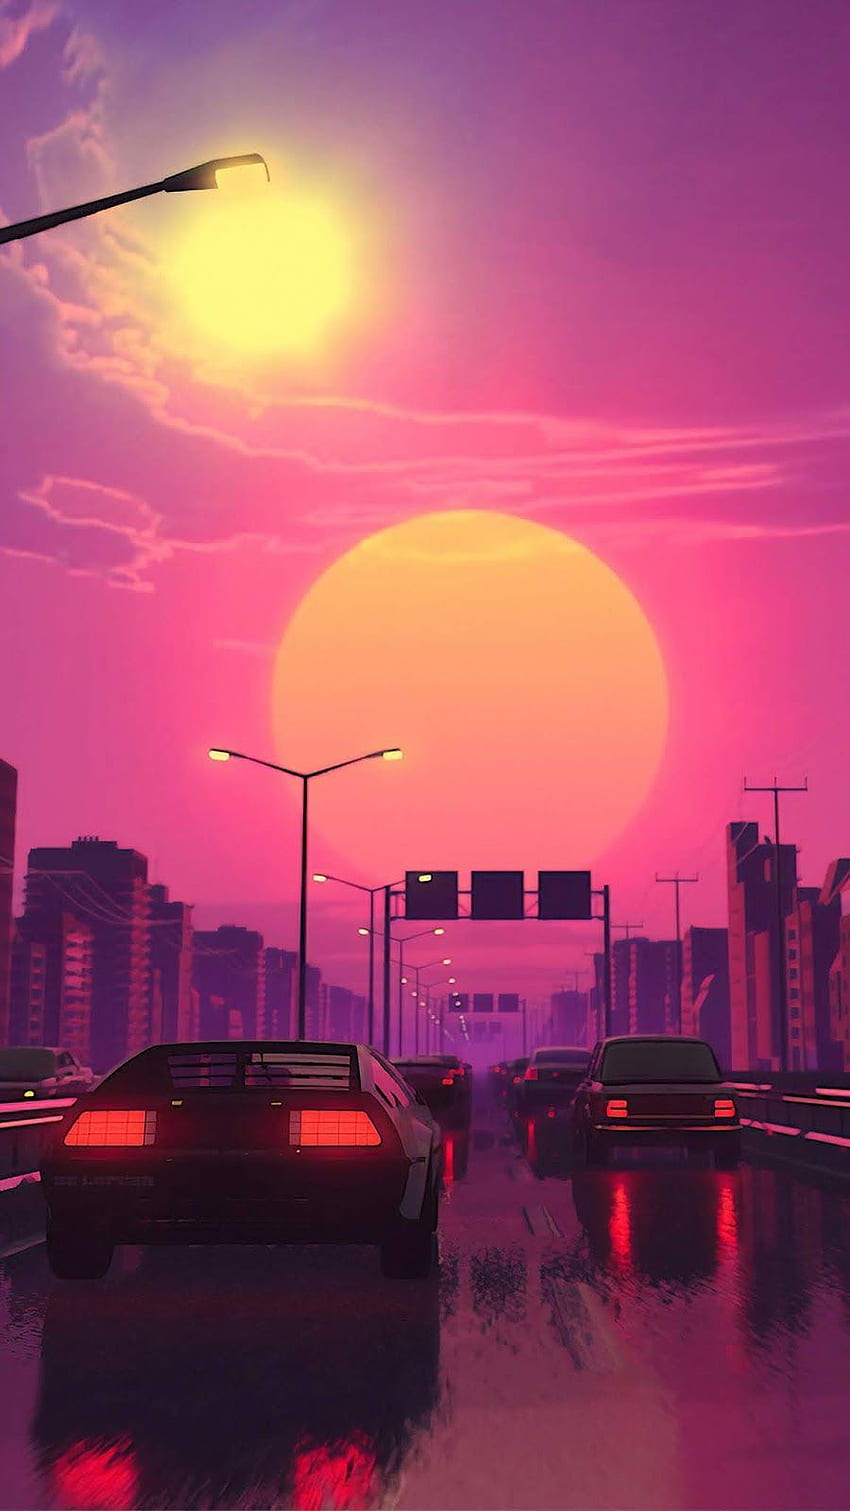 A painting of cars driving down the street at night - Anime sunset